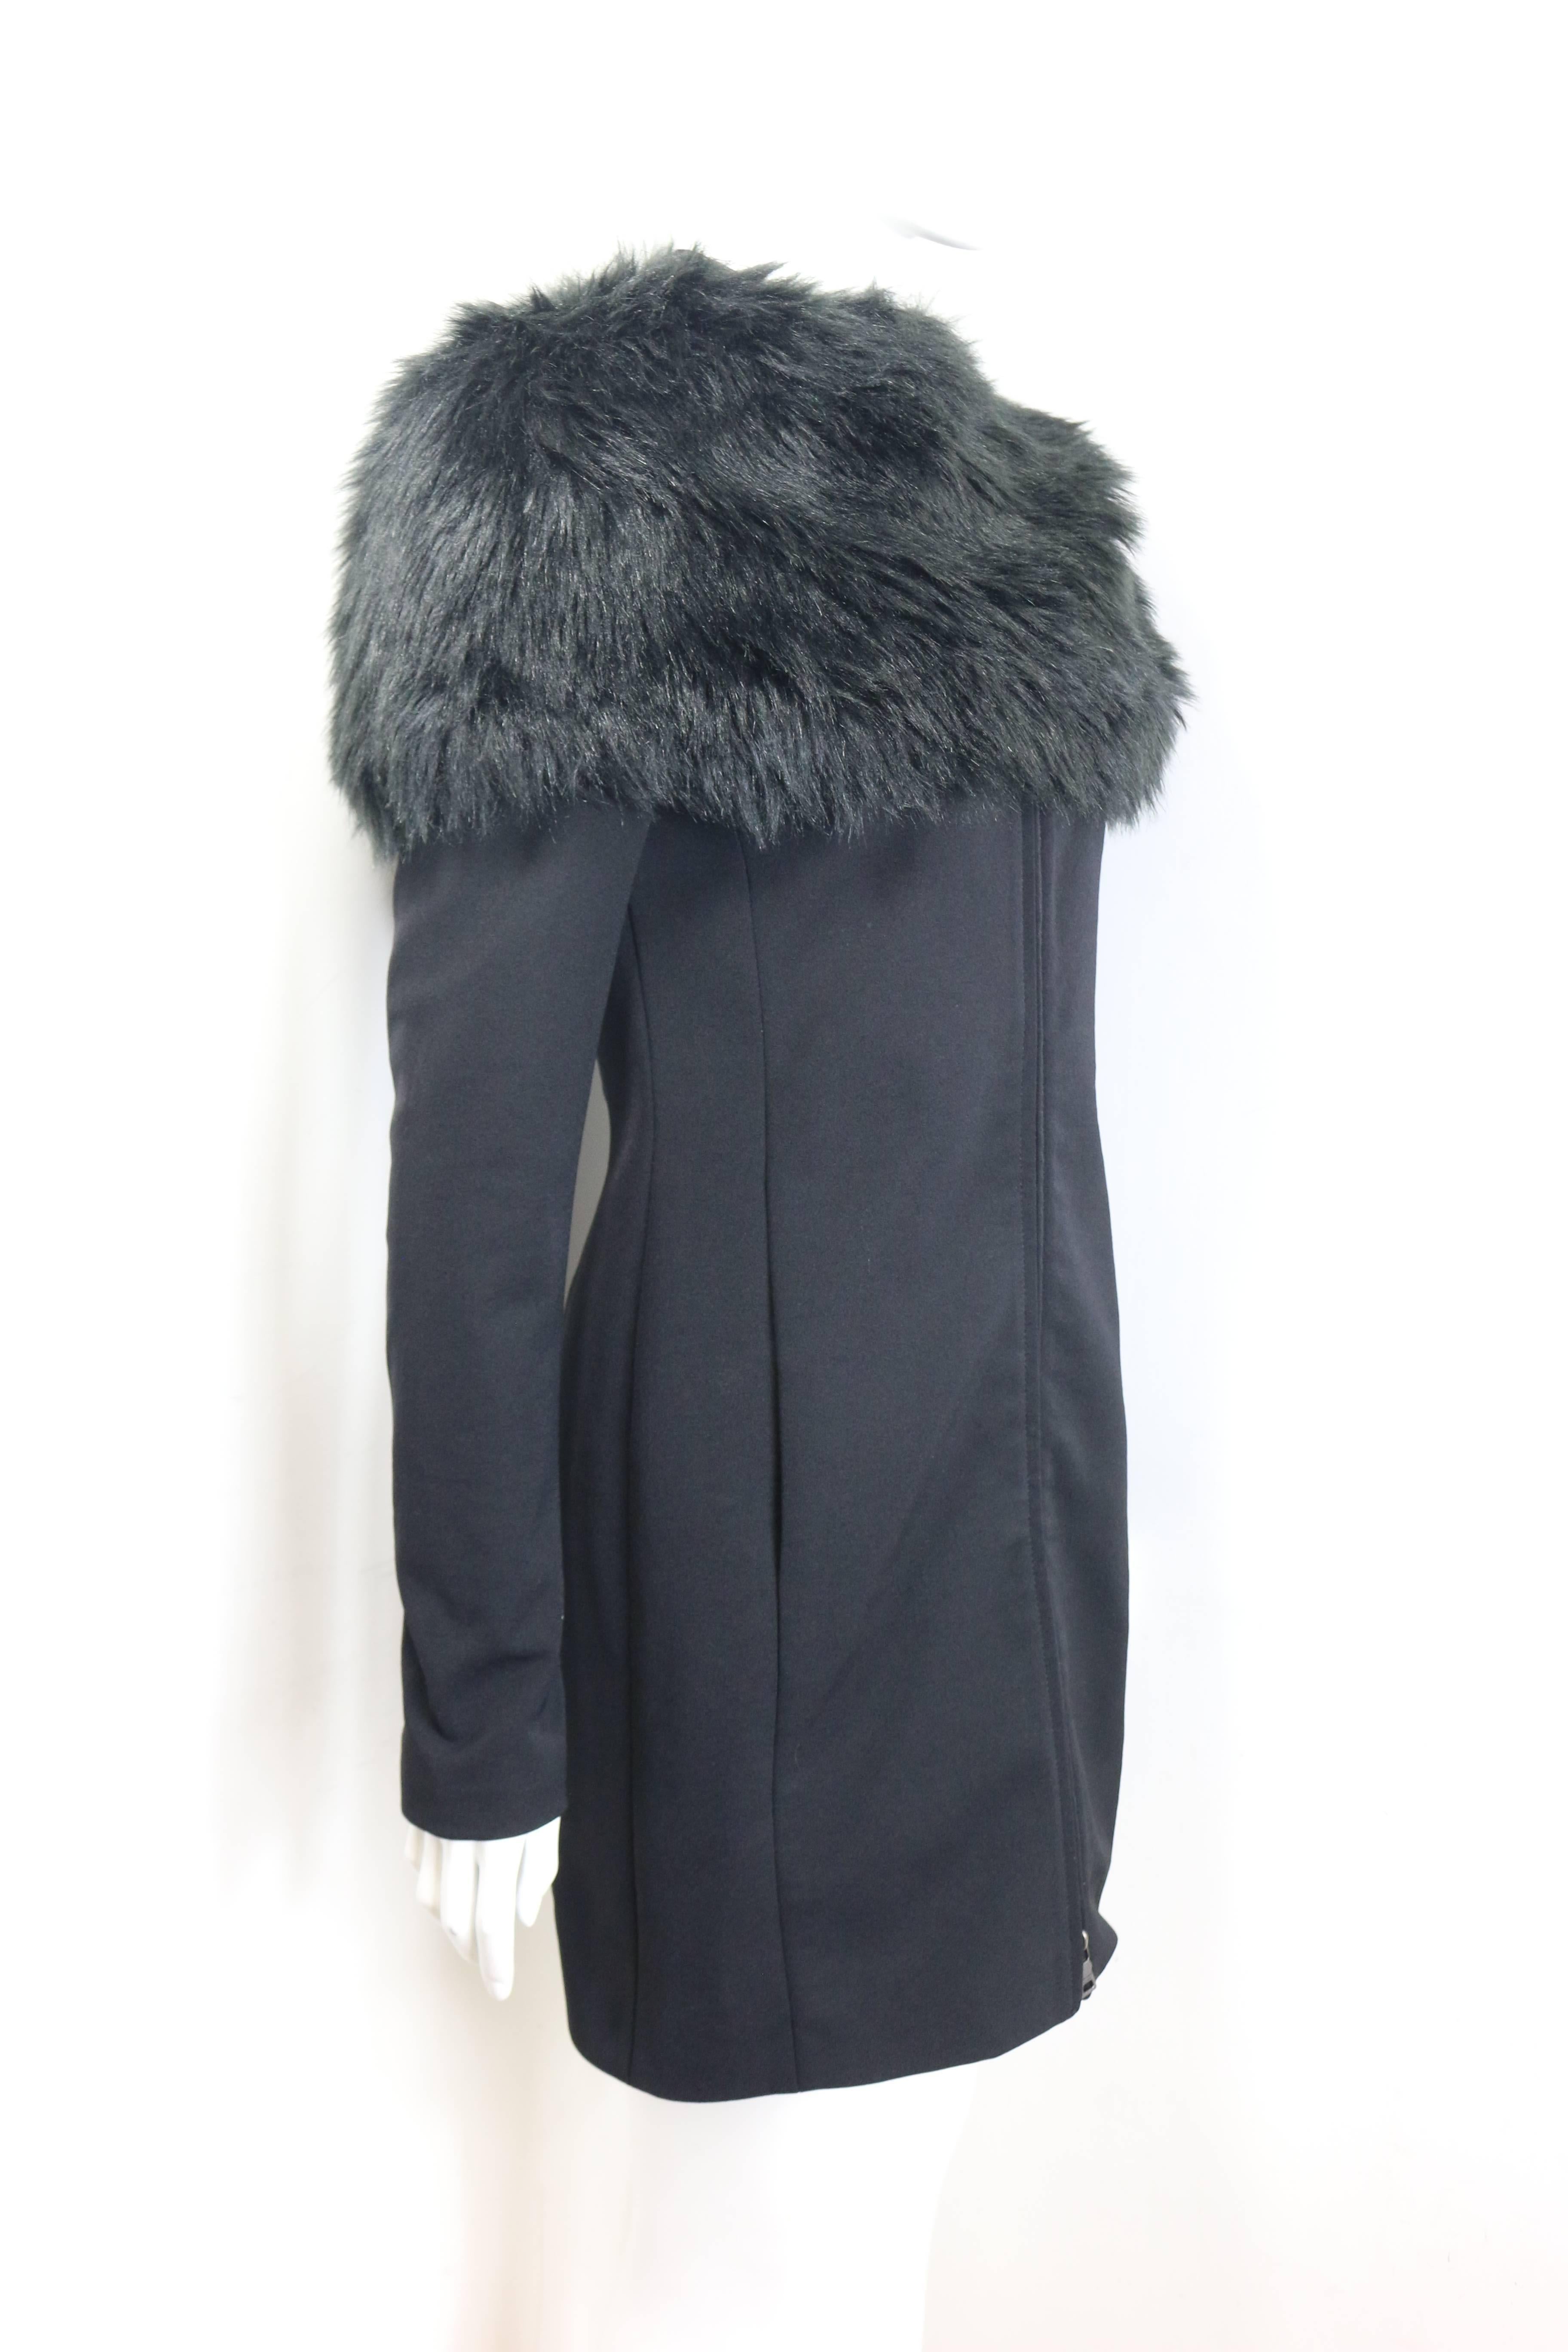 - Prada black nylon knee length jacket. 

- Mandarin Collar. 

- Two way zippers closure. 

- Side pockets. 

- Detachable black faux fur. 

- Size 38. 

- Outer Shell: 70% Nylon, 24 % Polyester, 4% Others. Lining: 57% Viscose, 43% Polyester.